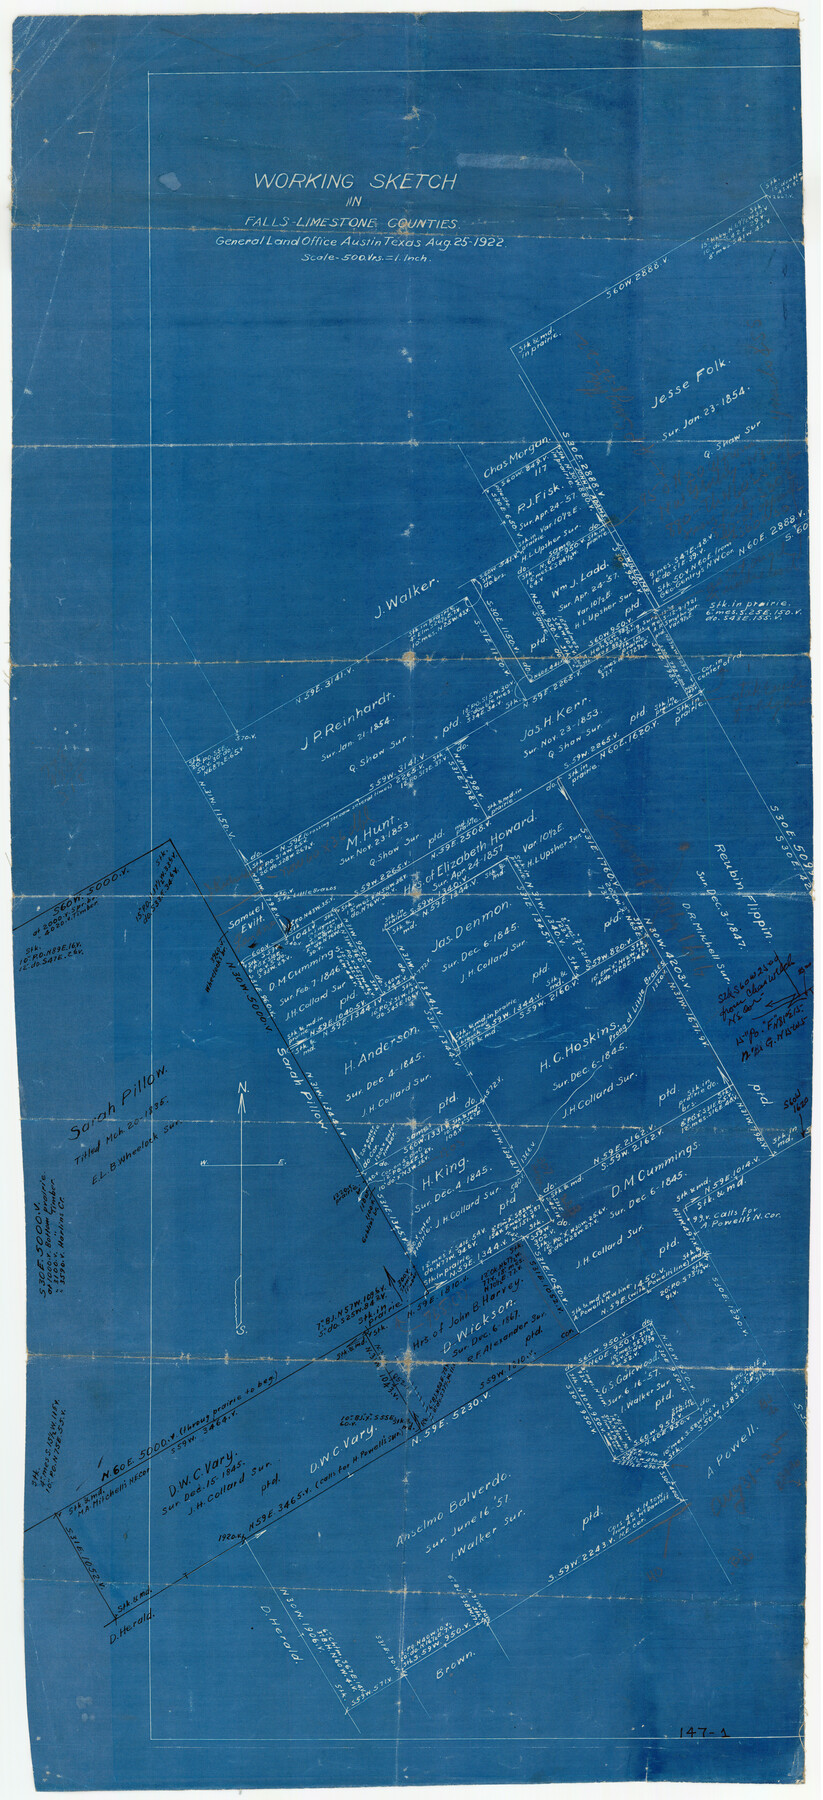 91088, Working Sketch in Falls and Limestone Counties, Twichell Survey Records